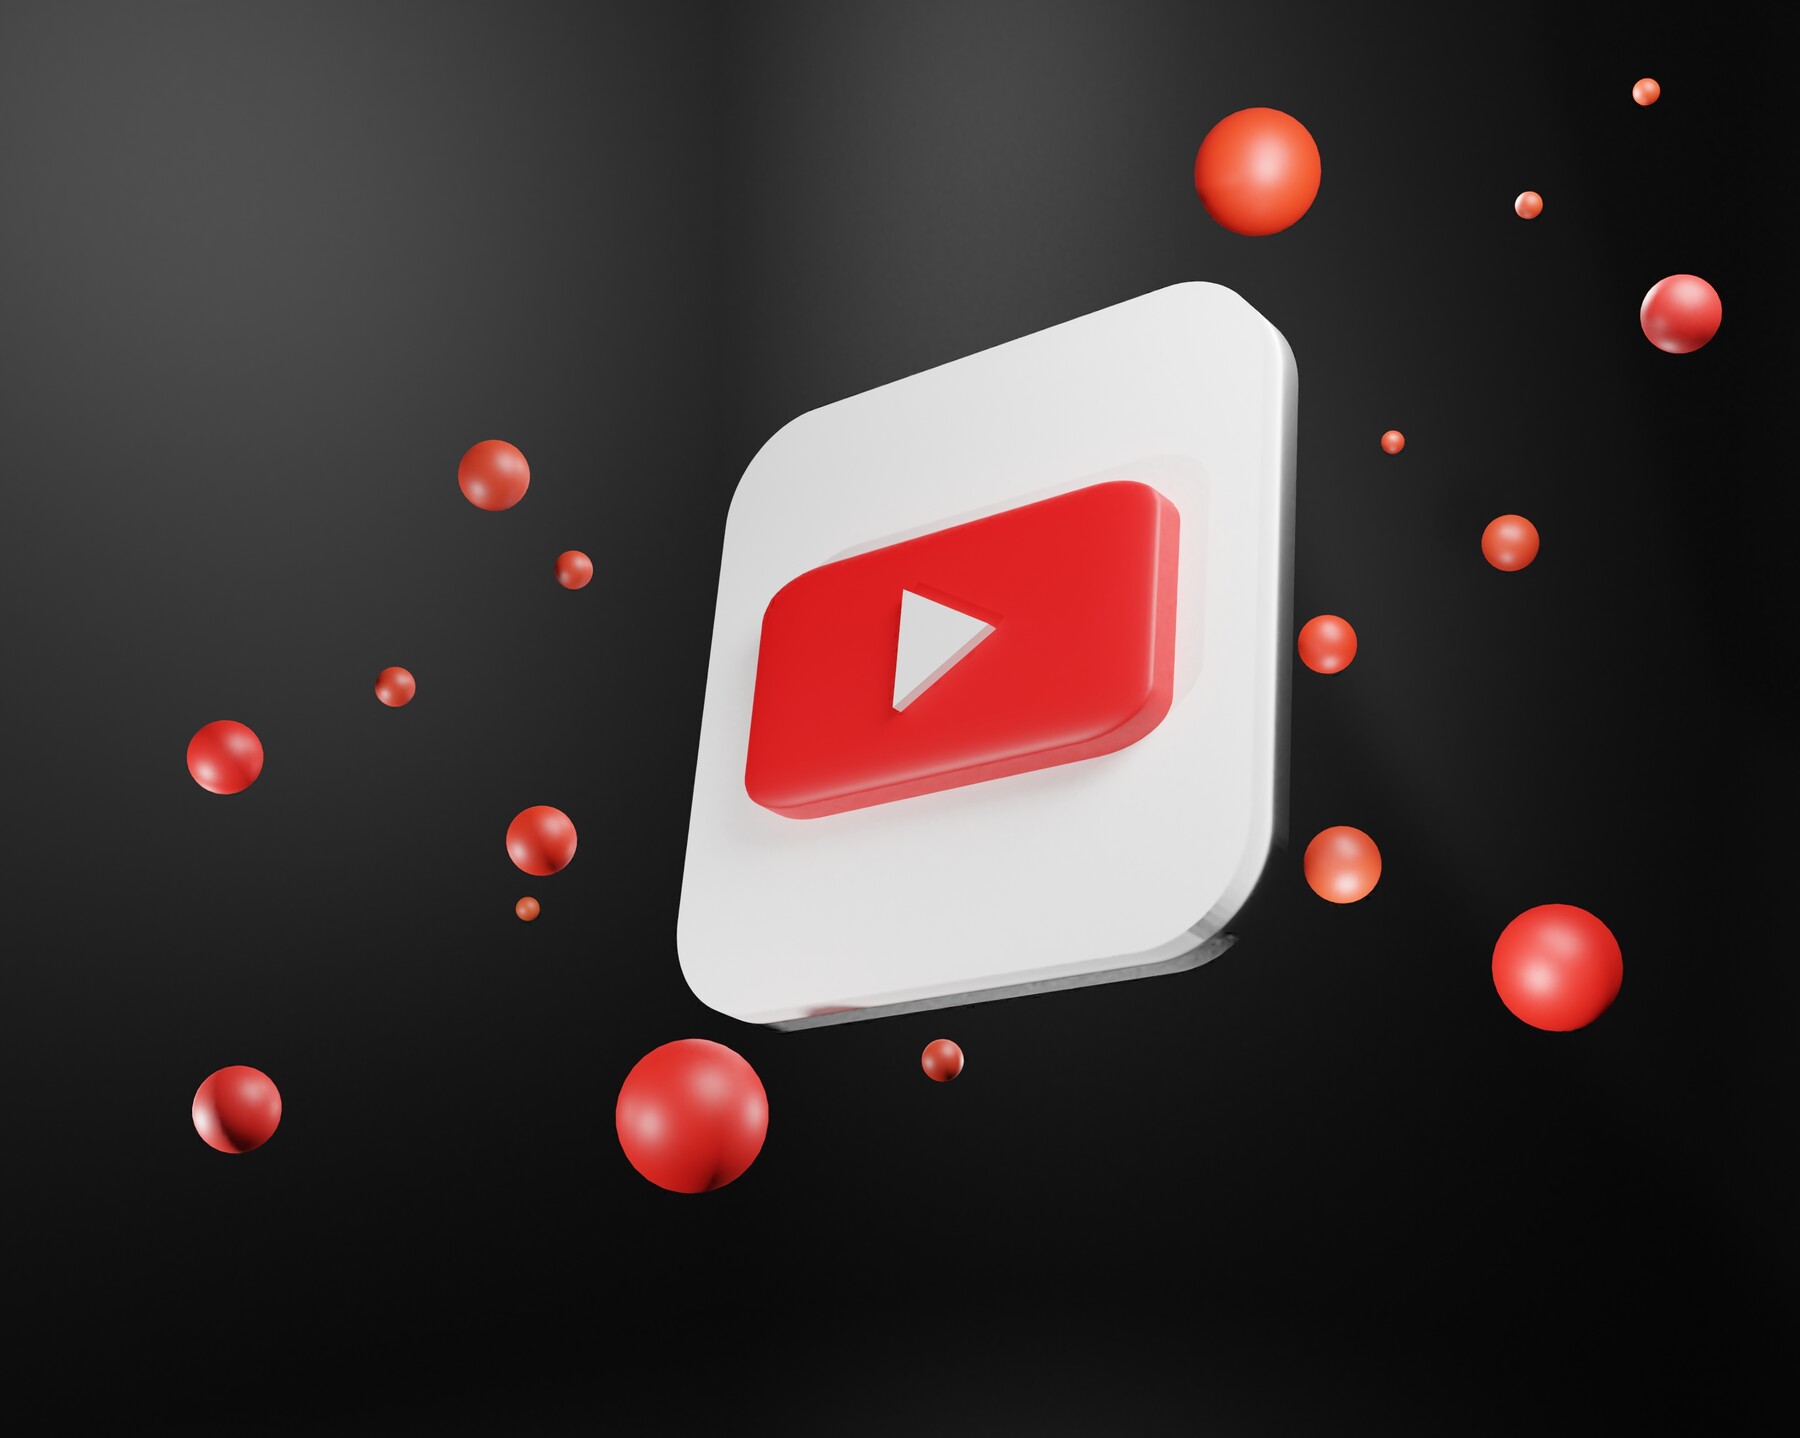 3D Youtube Downloader 1.20.1 + Batch 2.12.17 download the new for ios